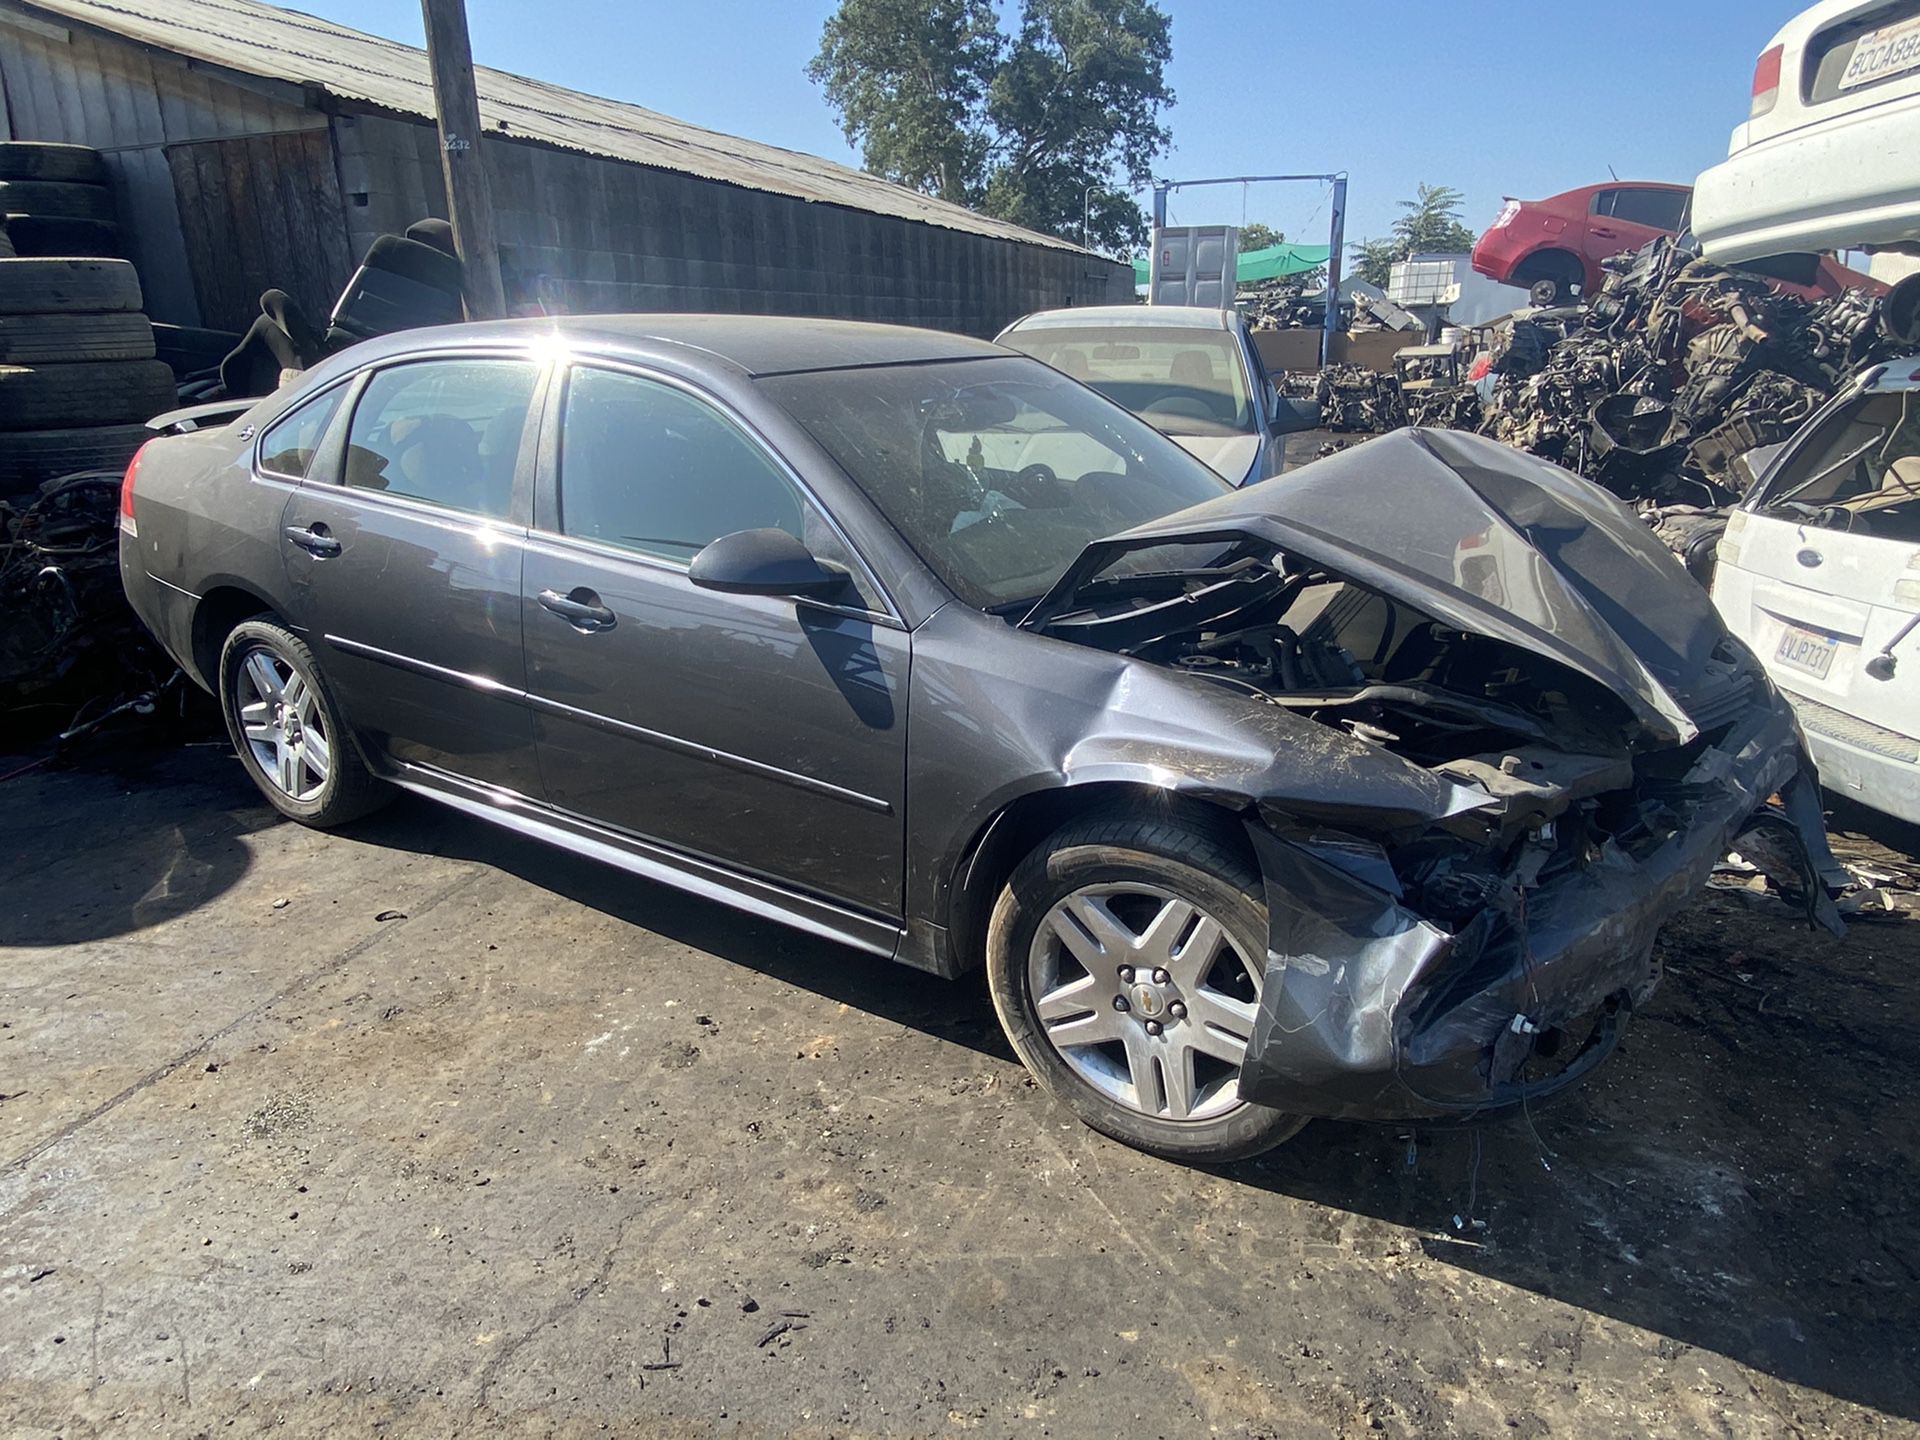 2010 CHEVY IMPALA 3.5L (PARTS ONLY)